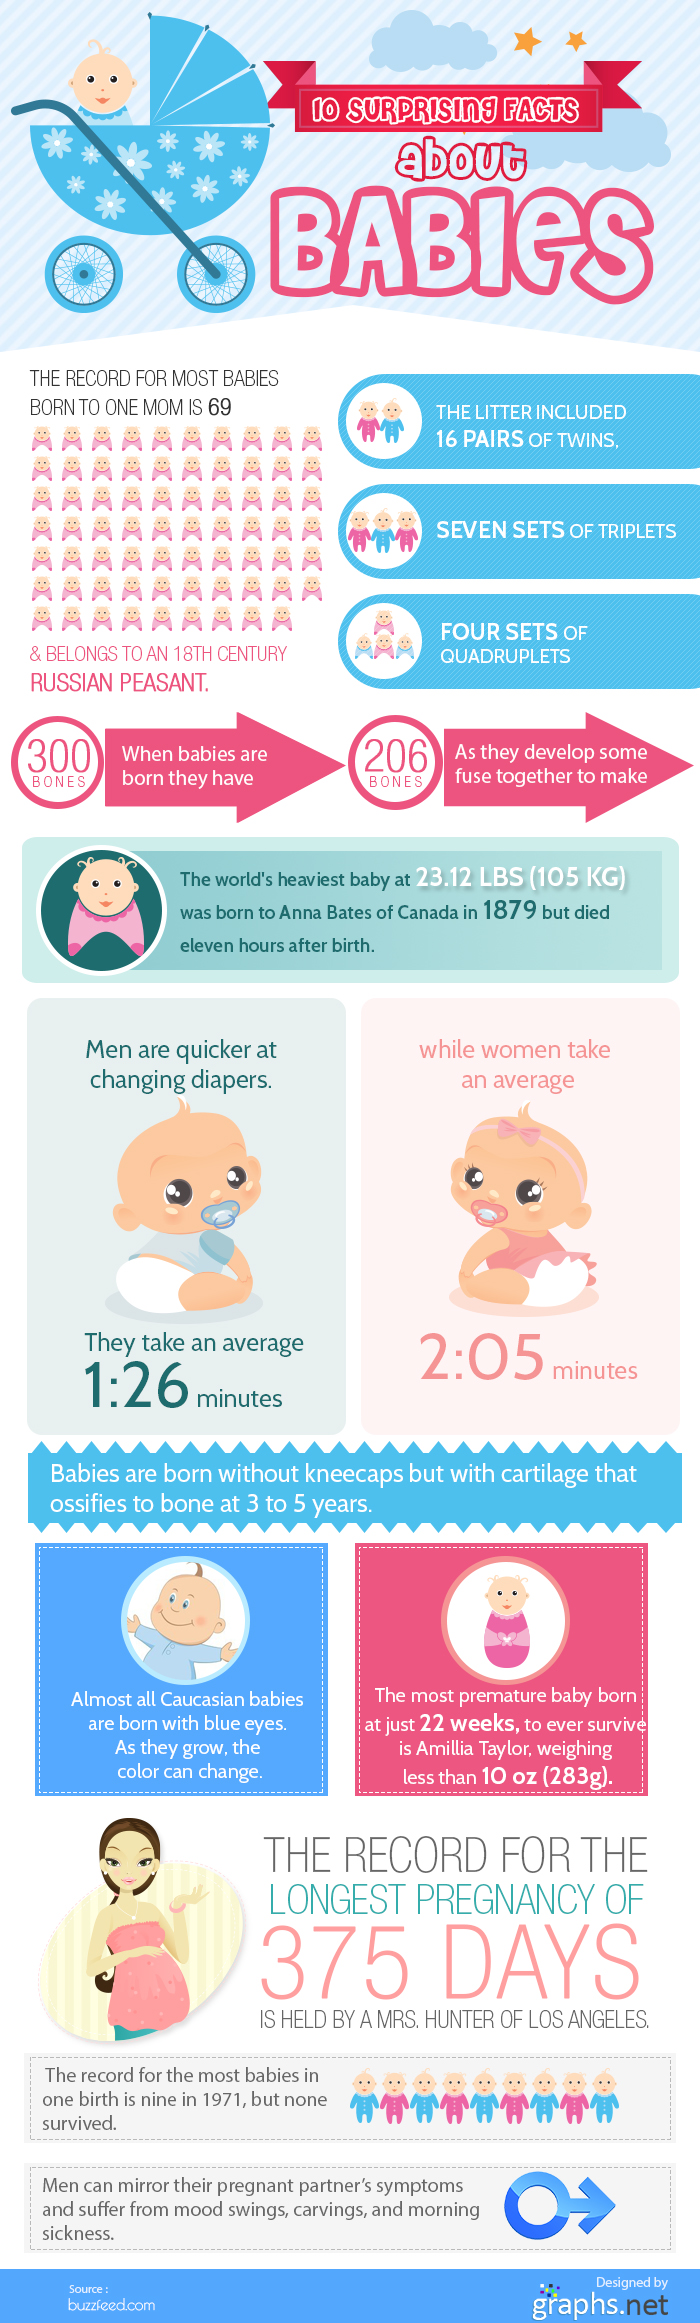 02 10 suprising facts about babies